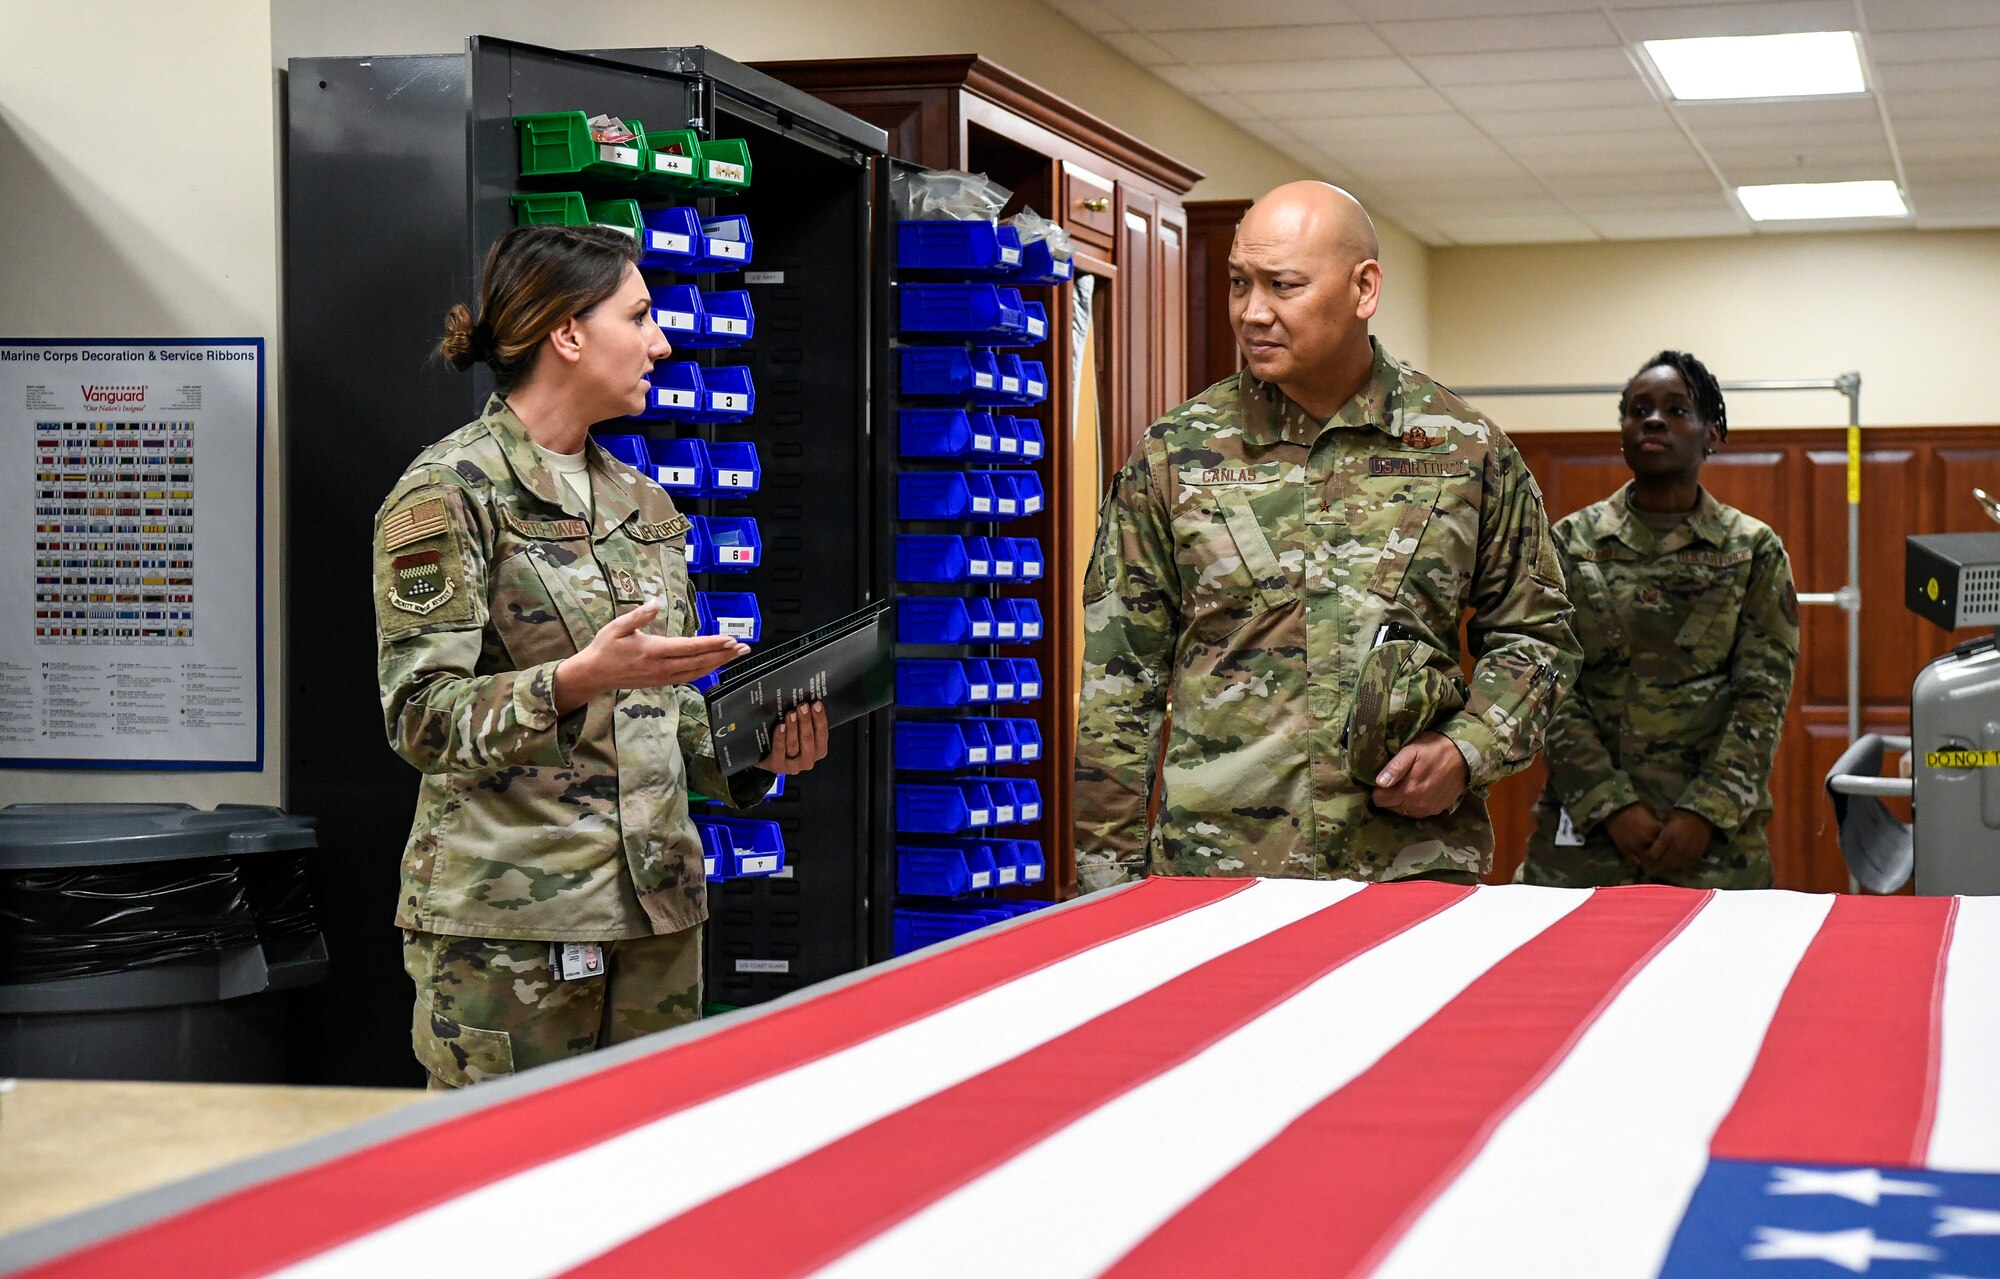 Master Sgt. Holly Roberts-Davis, Air Force Mortuary Affairs Operations public affairs, speaks to Brig. Gen. Jimmy Canlas, 618th Air Operations Center commander, Jan. 24, 2020, at Dover Air Force Base, Del. Roberts-Davis briefed Canlas on how AFMAO provides care, service and support to fallen service members and their families. (U.S. Air Force photo by Senior Airman Christopher Quail)